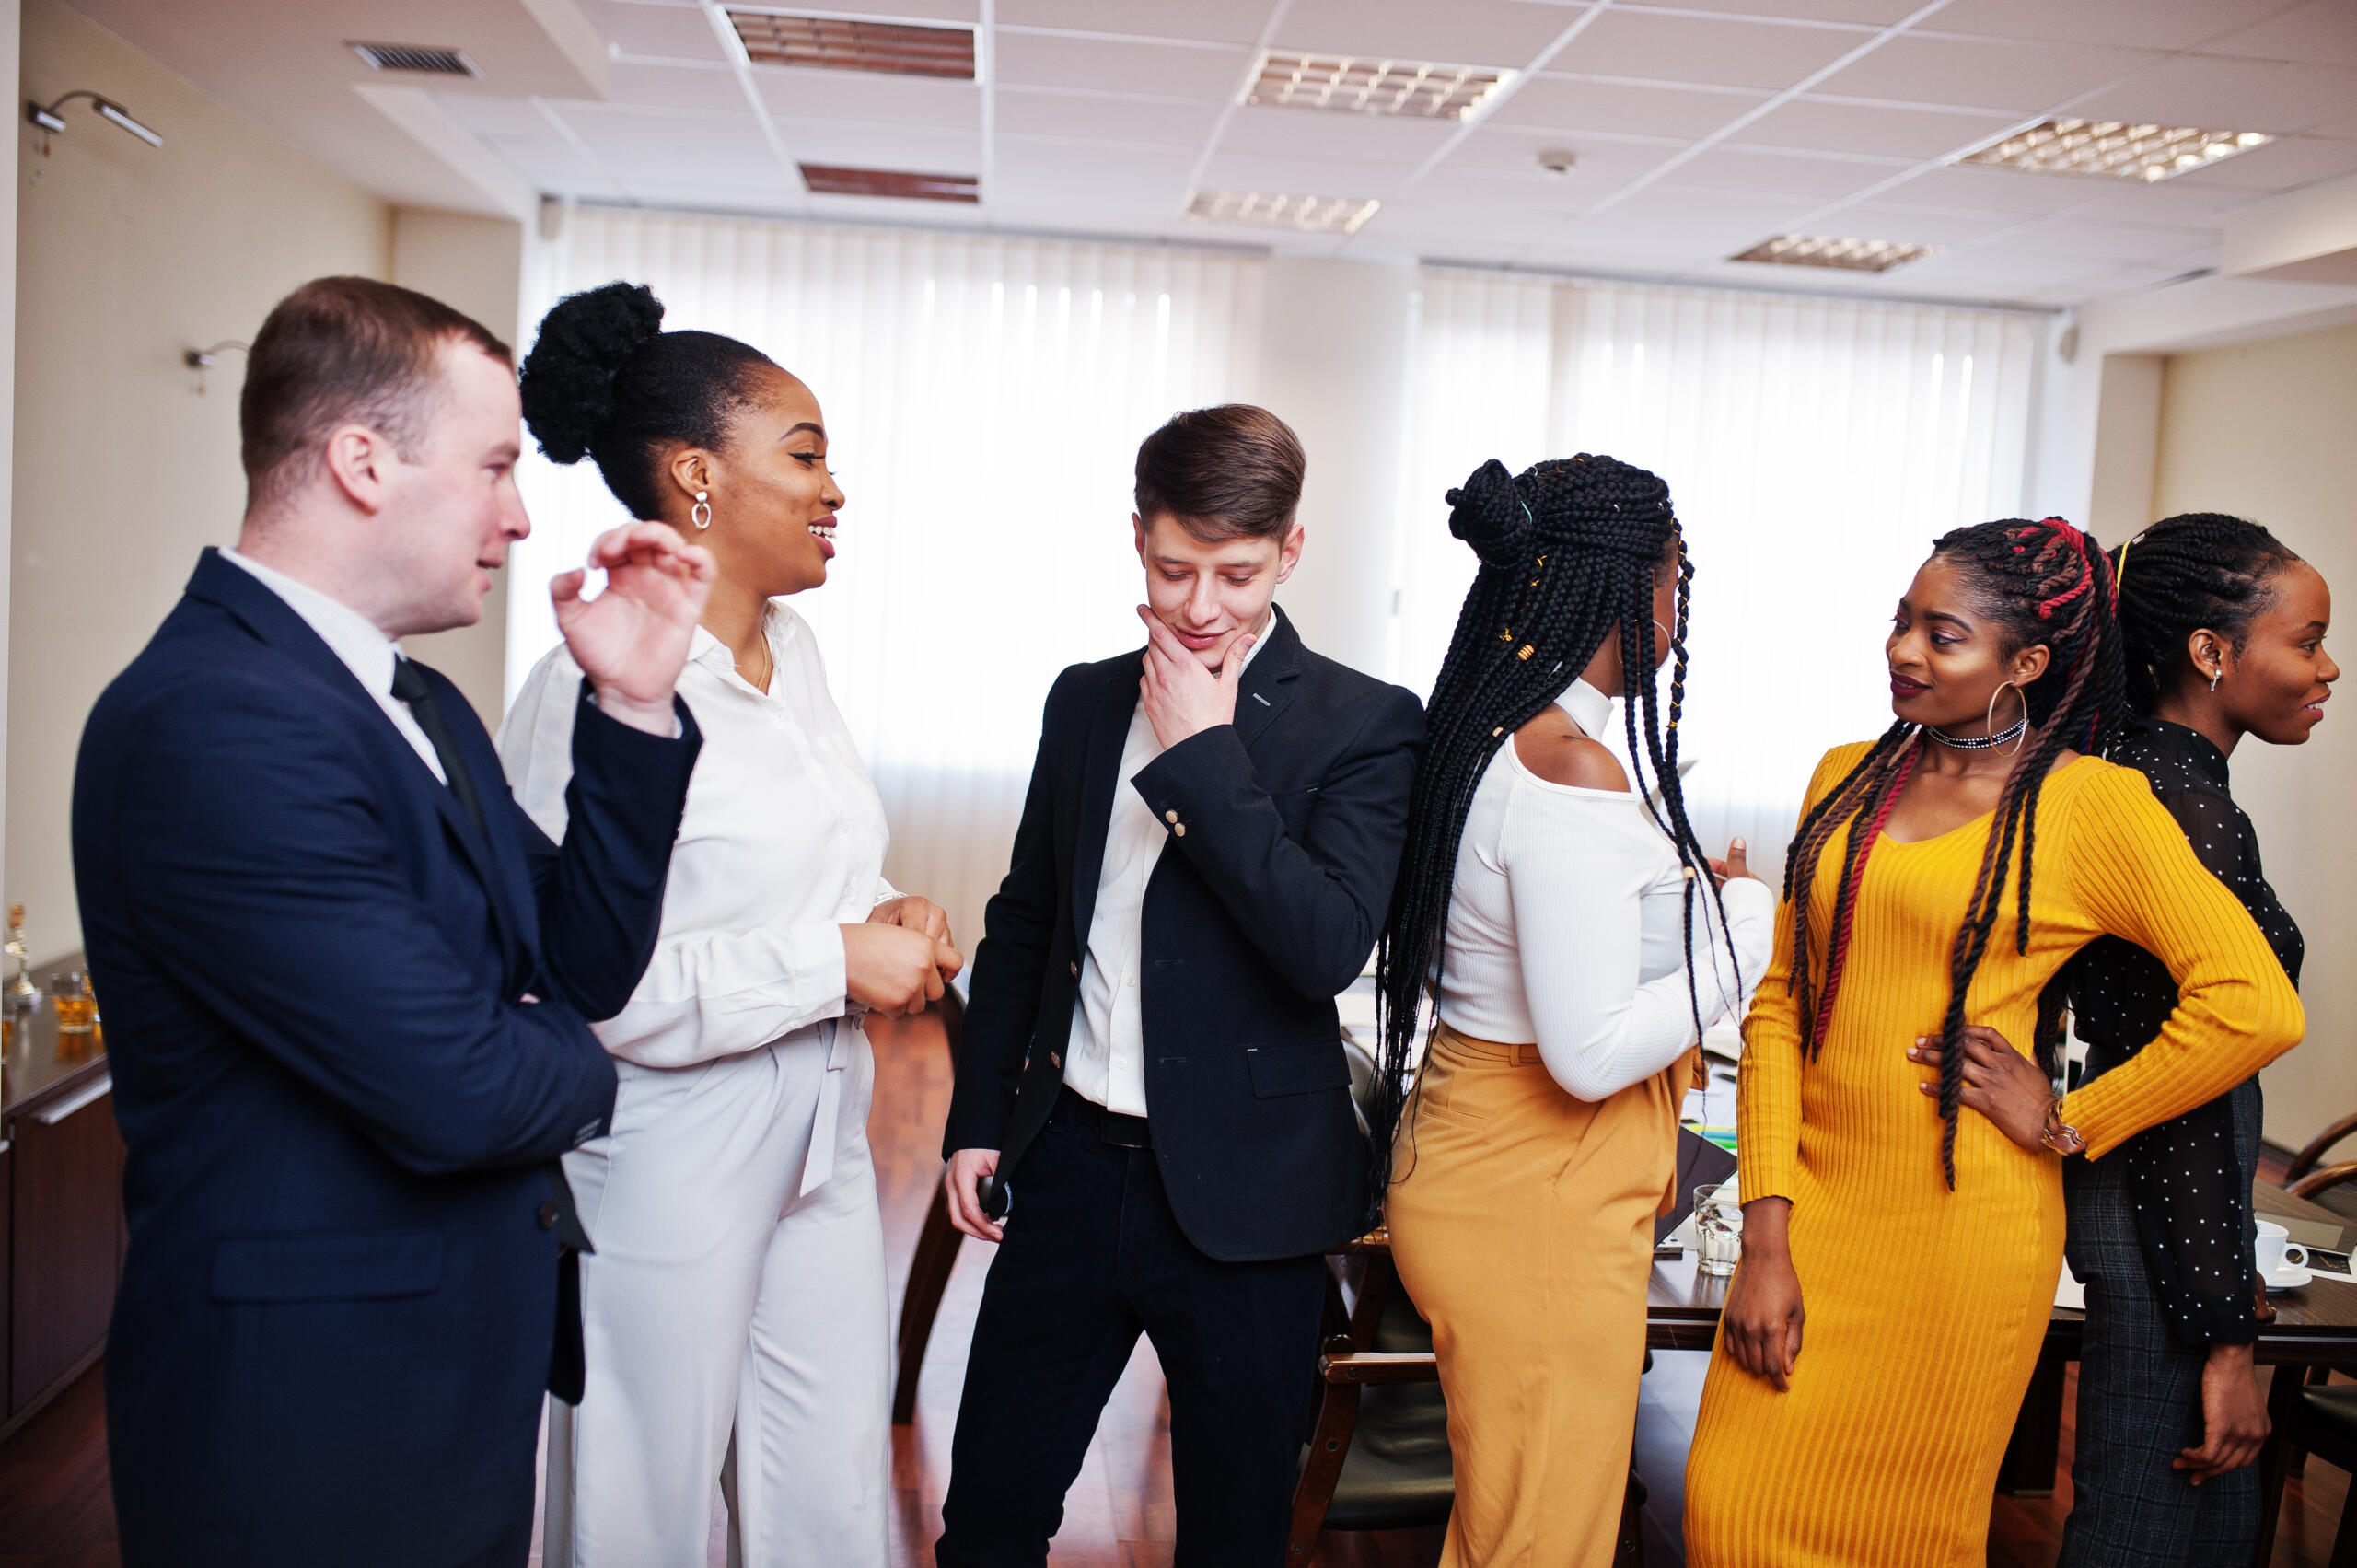 How to make small talk: a group of people gather around in an office having a conversation